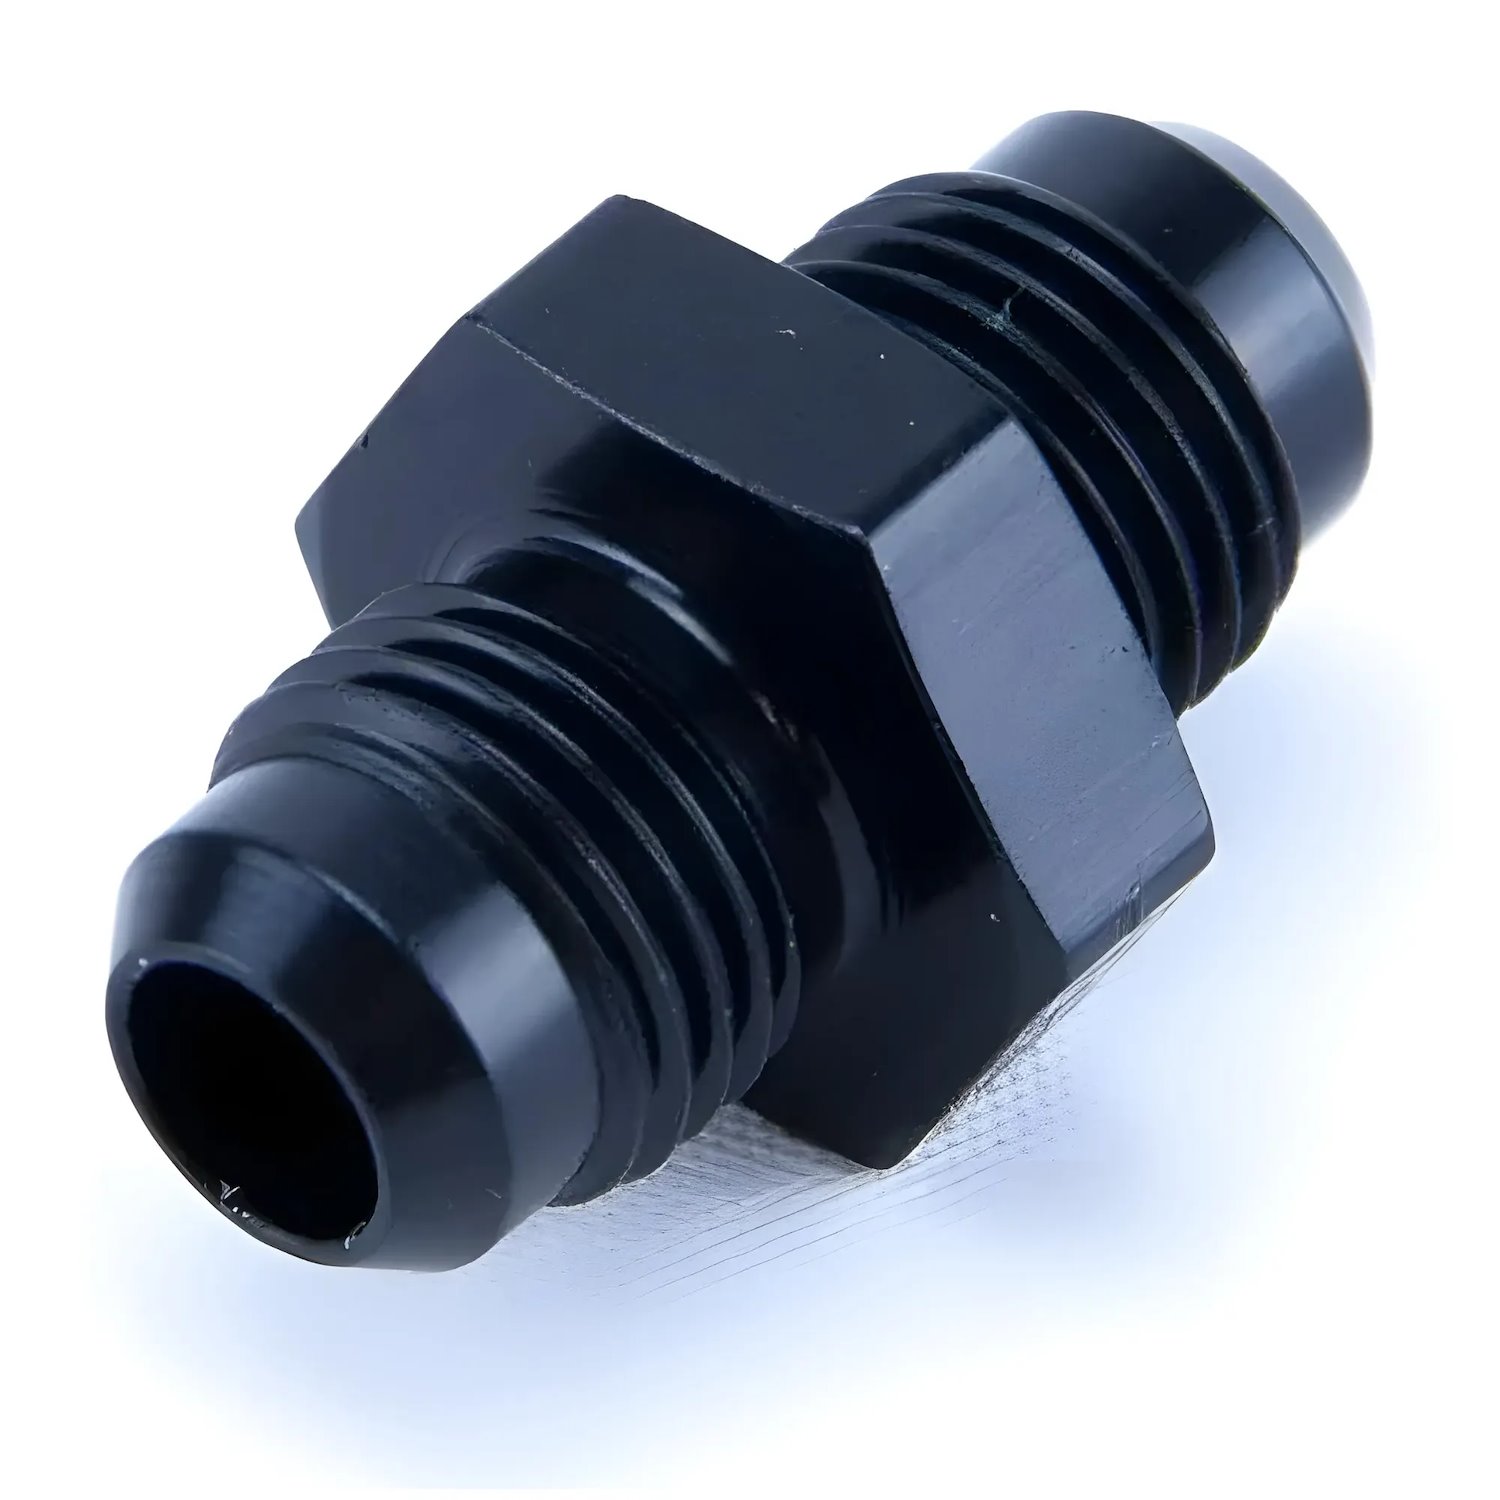 00-01602 6AN x 6AN Union Straight Fitting, Male/Male, Black